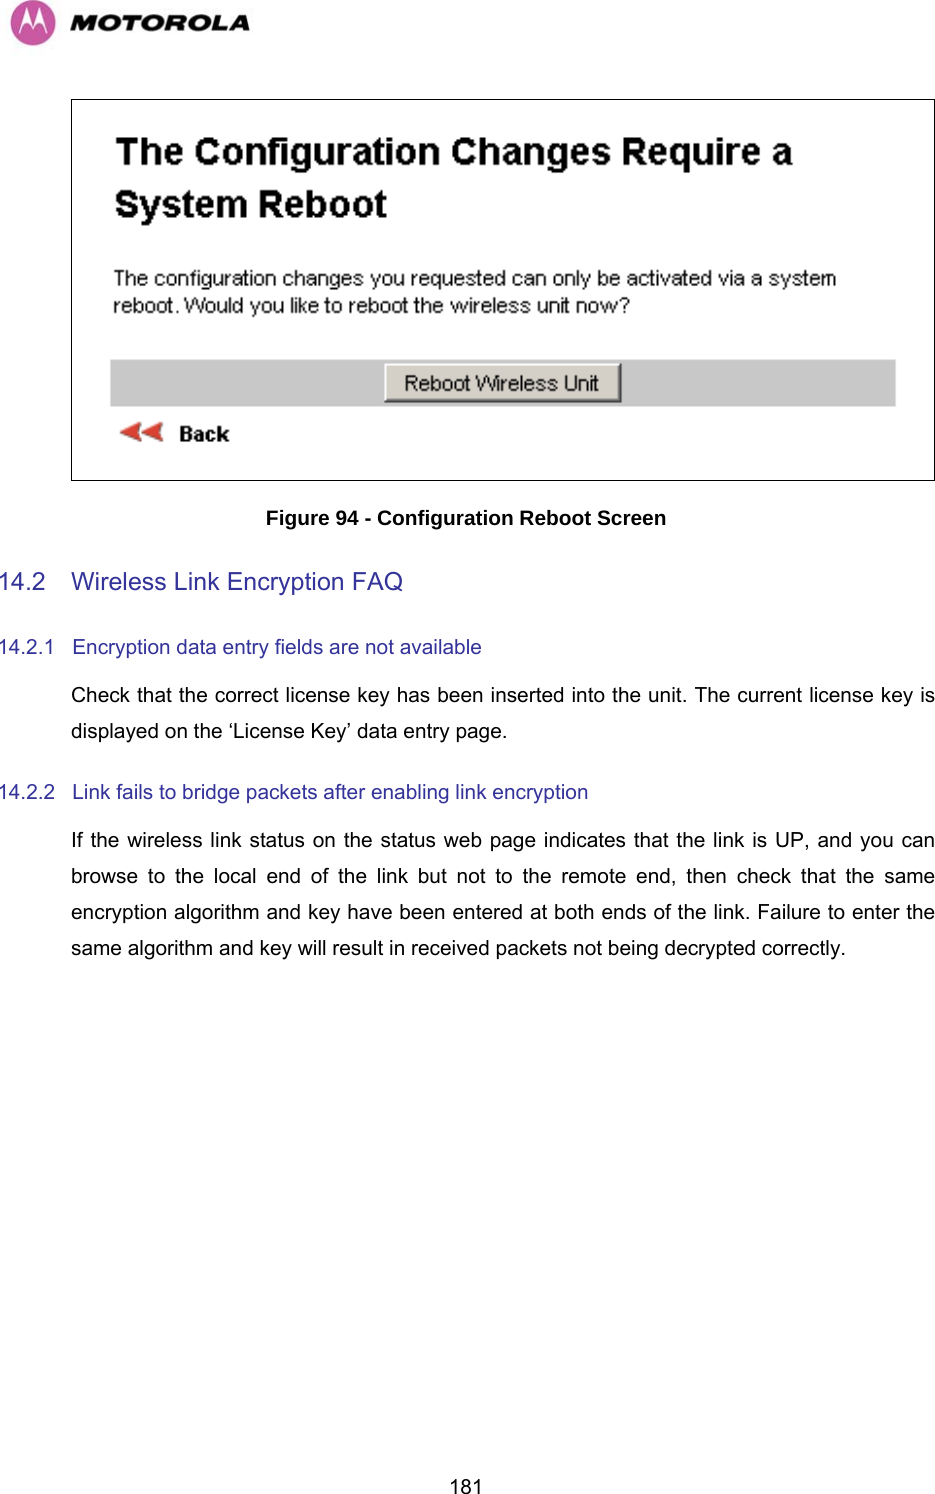   181 Figure 94 - Configuration Reboot Screen 14.2  Wireless Link Encryption FAQ 14.2.1  Encryption data entry fields are not available Check that the correct license key has been inserted into the unit. The current license key is displayed on the ‘License Key’ data entry page. 14.2.2  Link fails to bridge packets after enabling link encryption If the wireless link status on the status web page indicates that the link is UP, and you can browse to the local end of the link but not to the remote end, then check that the same encryption algorithm and key have been entered at both ends of the link. Failure to enter the same algorithm and key will result in received packets not being decrypted correctly.   